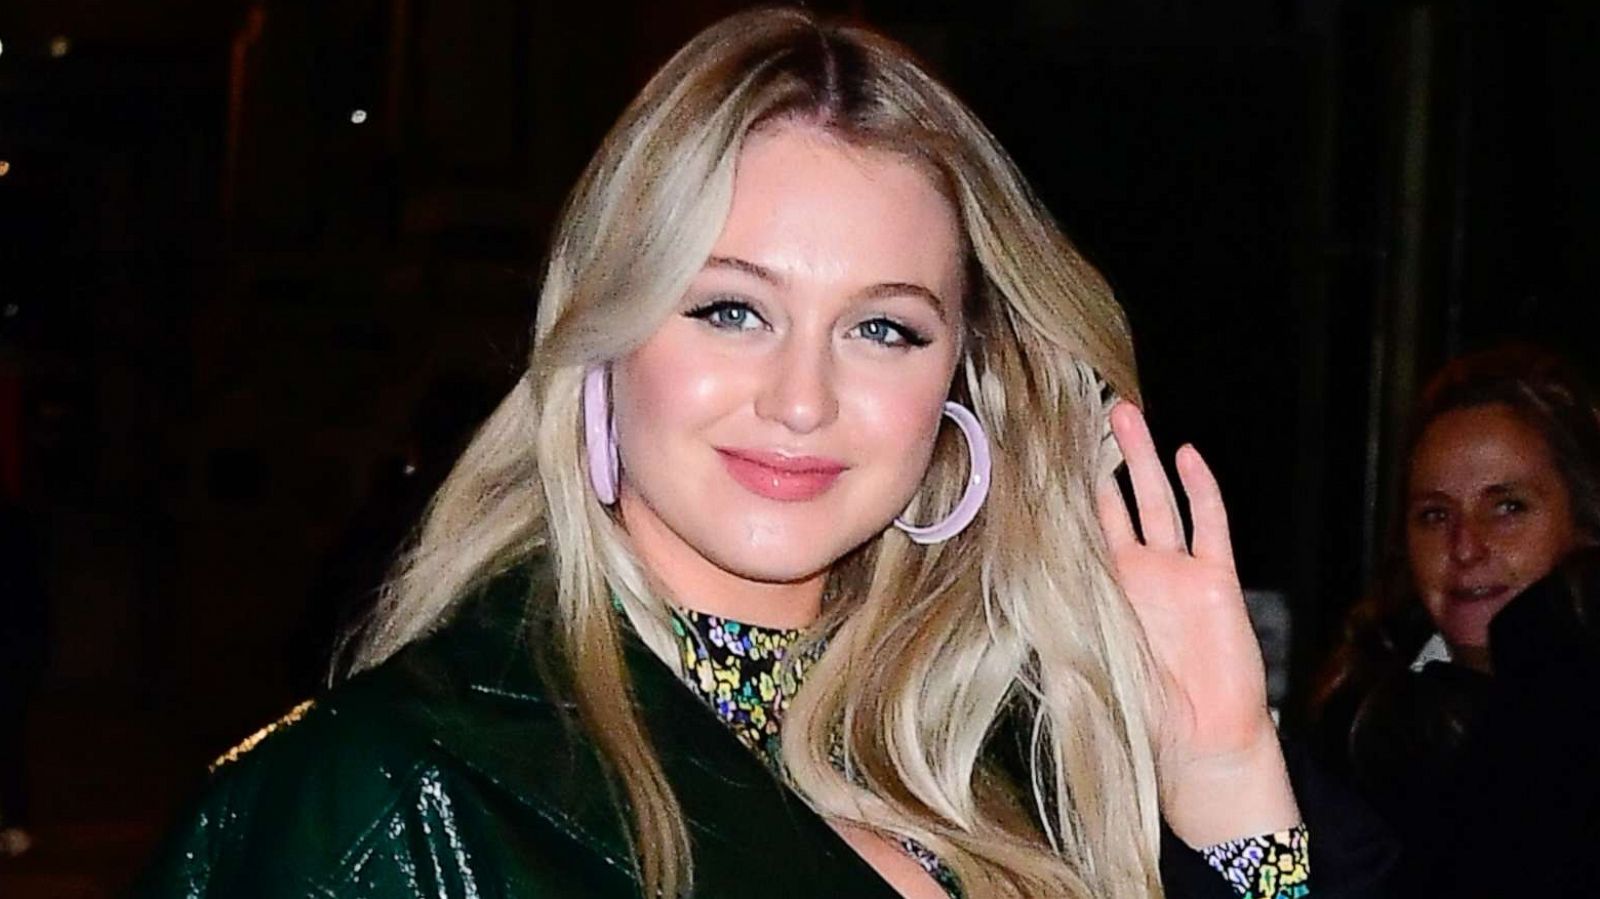 PHOTO: Iskra Lawrence attends an event, Nov. 4, 2019, in New York City.